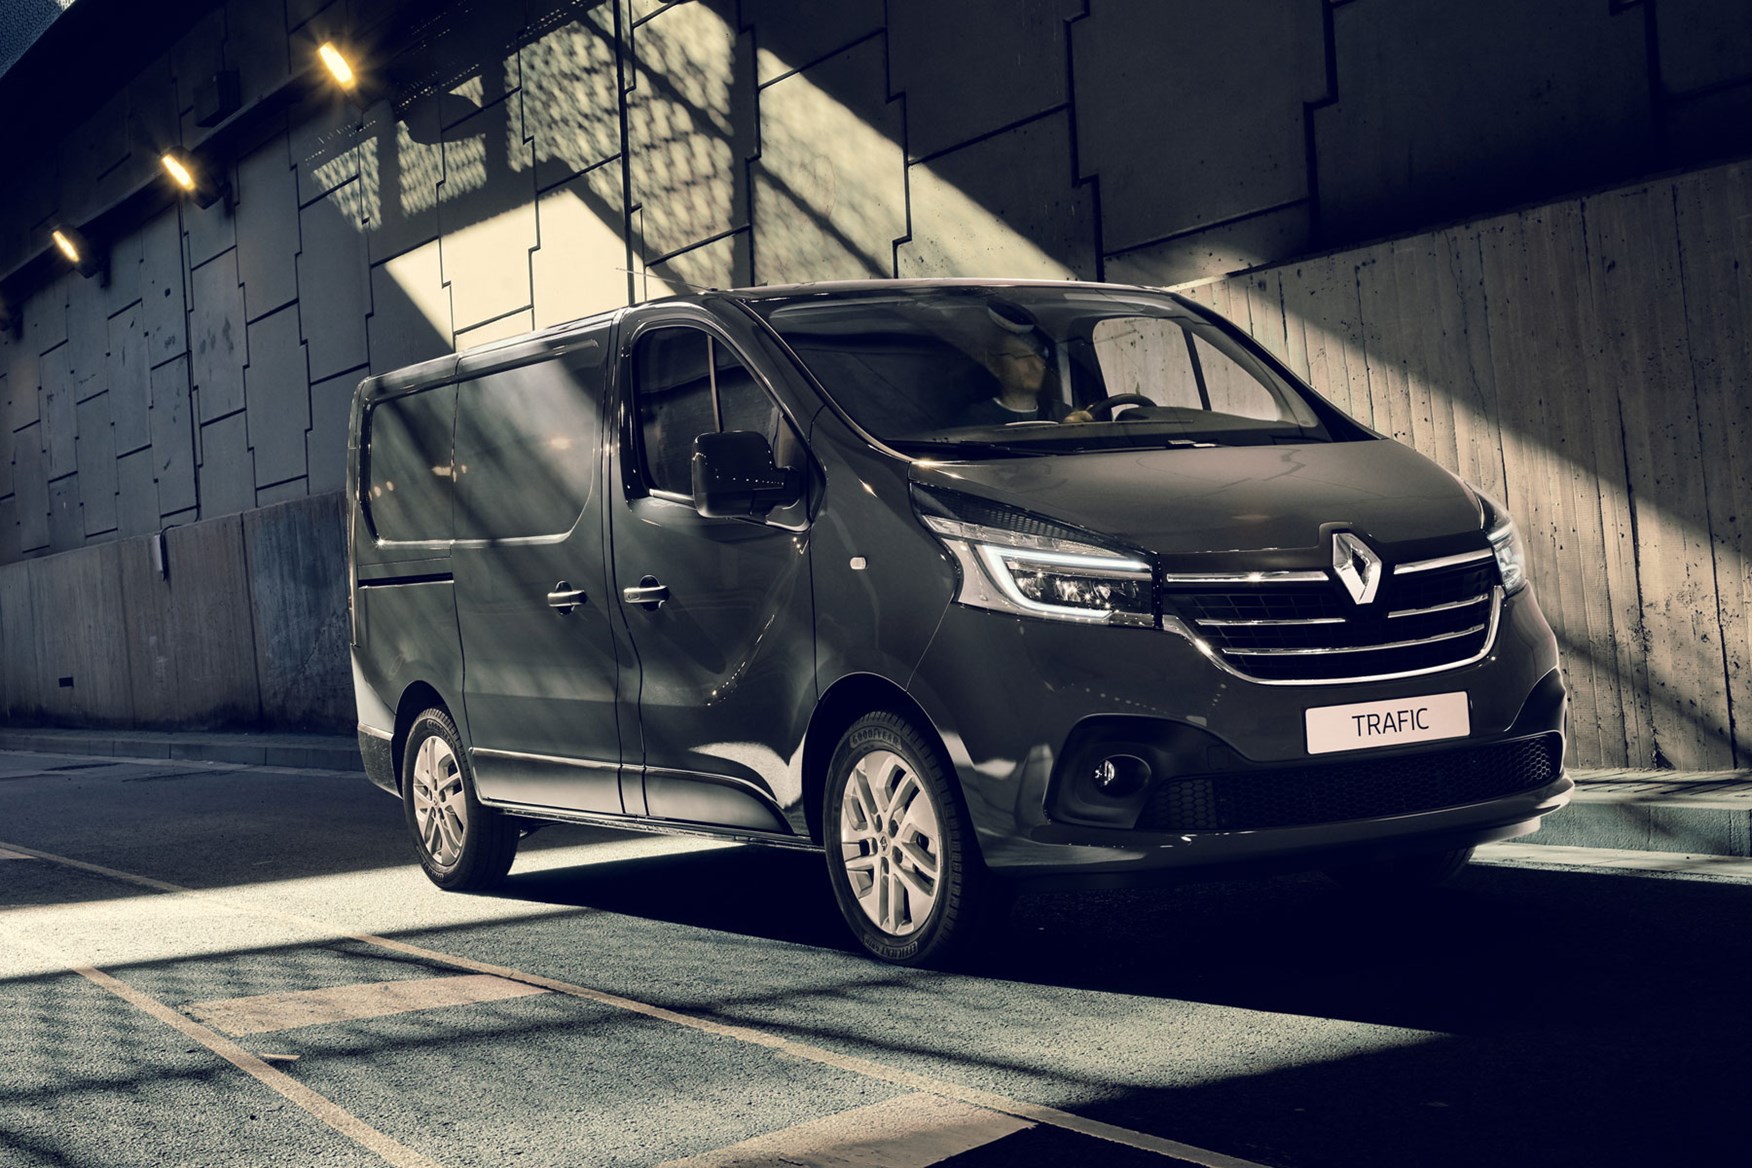 New Renault Trafic 2019 facelift and engine upgrade info